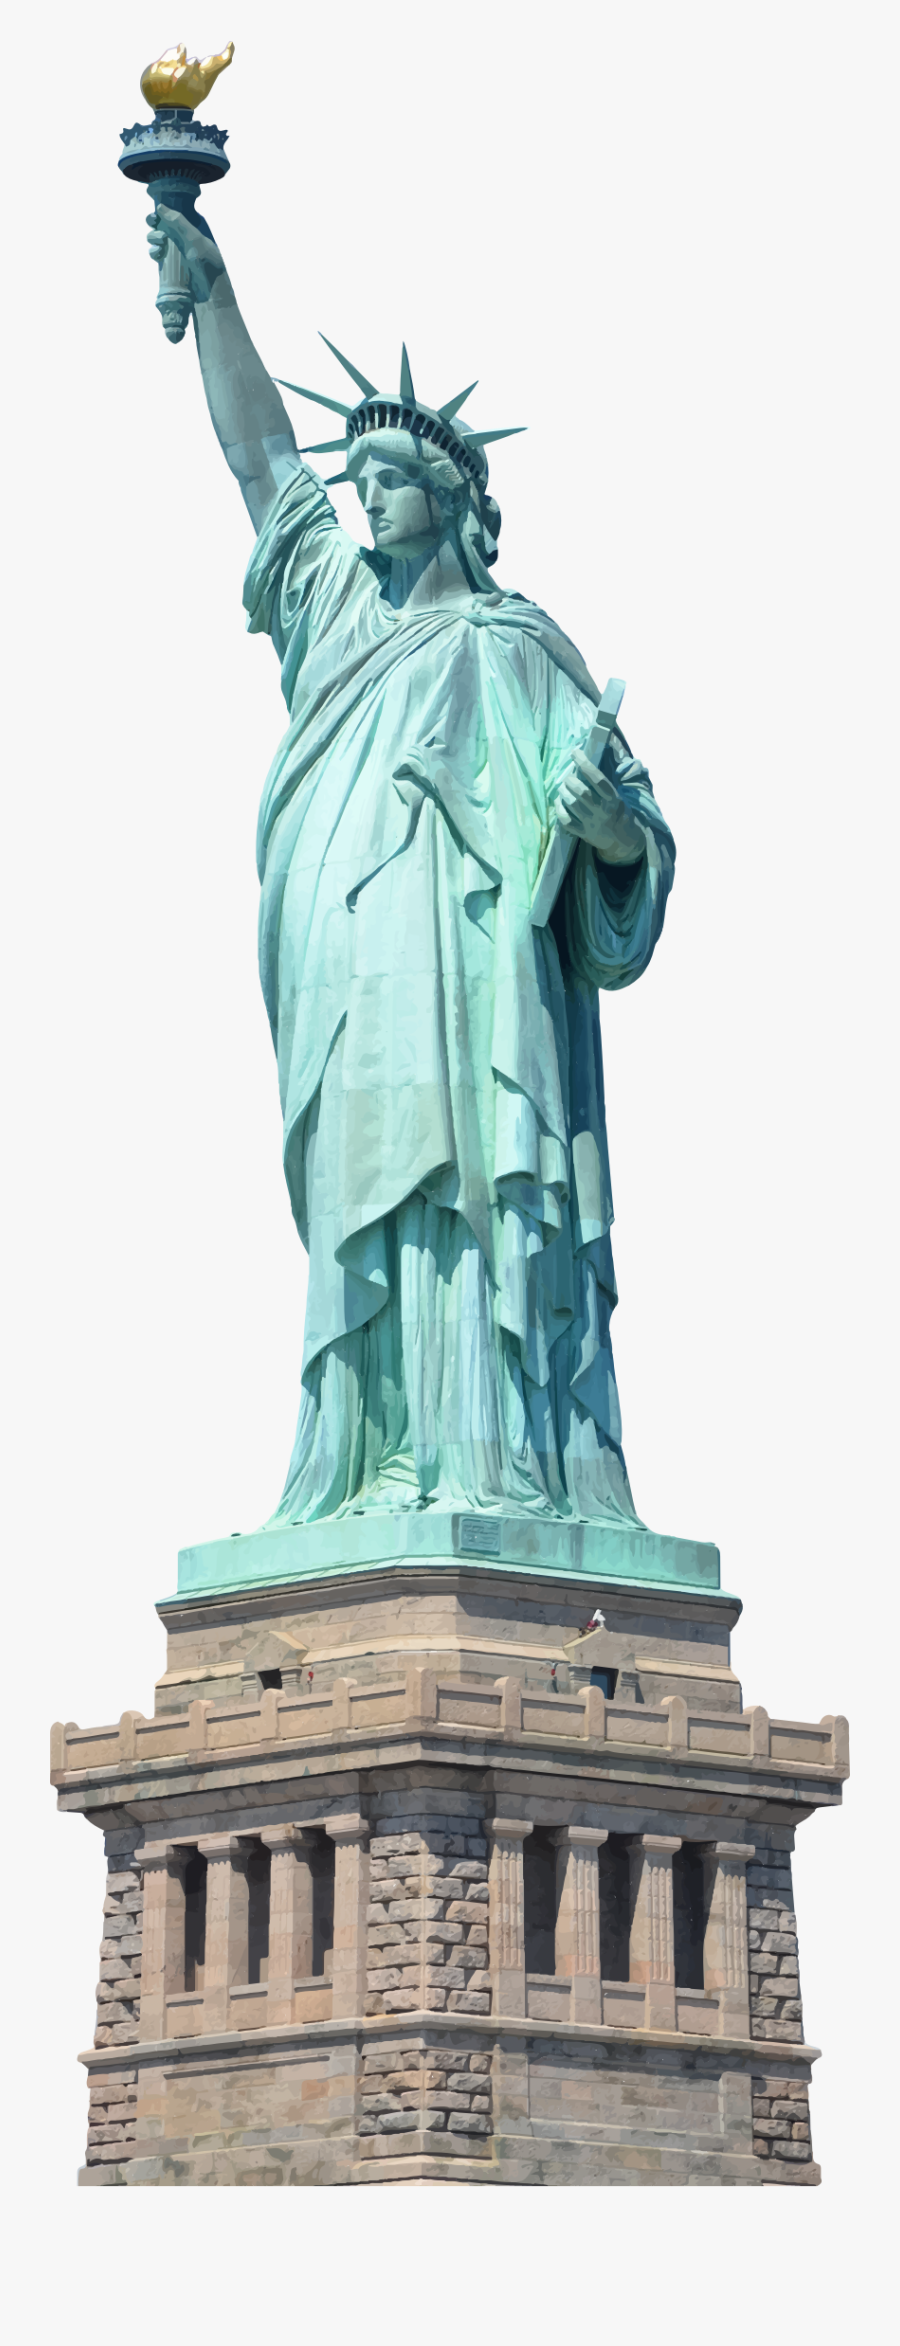 Statue Of Liberty Png Transparent Free Images - Statue Of Liberty, Transparent Clipart